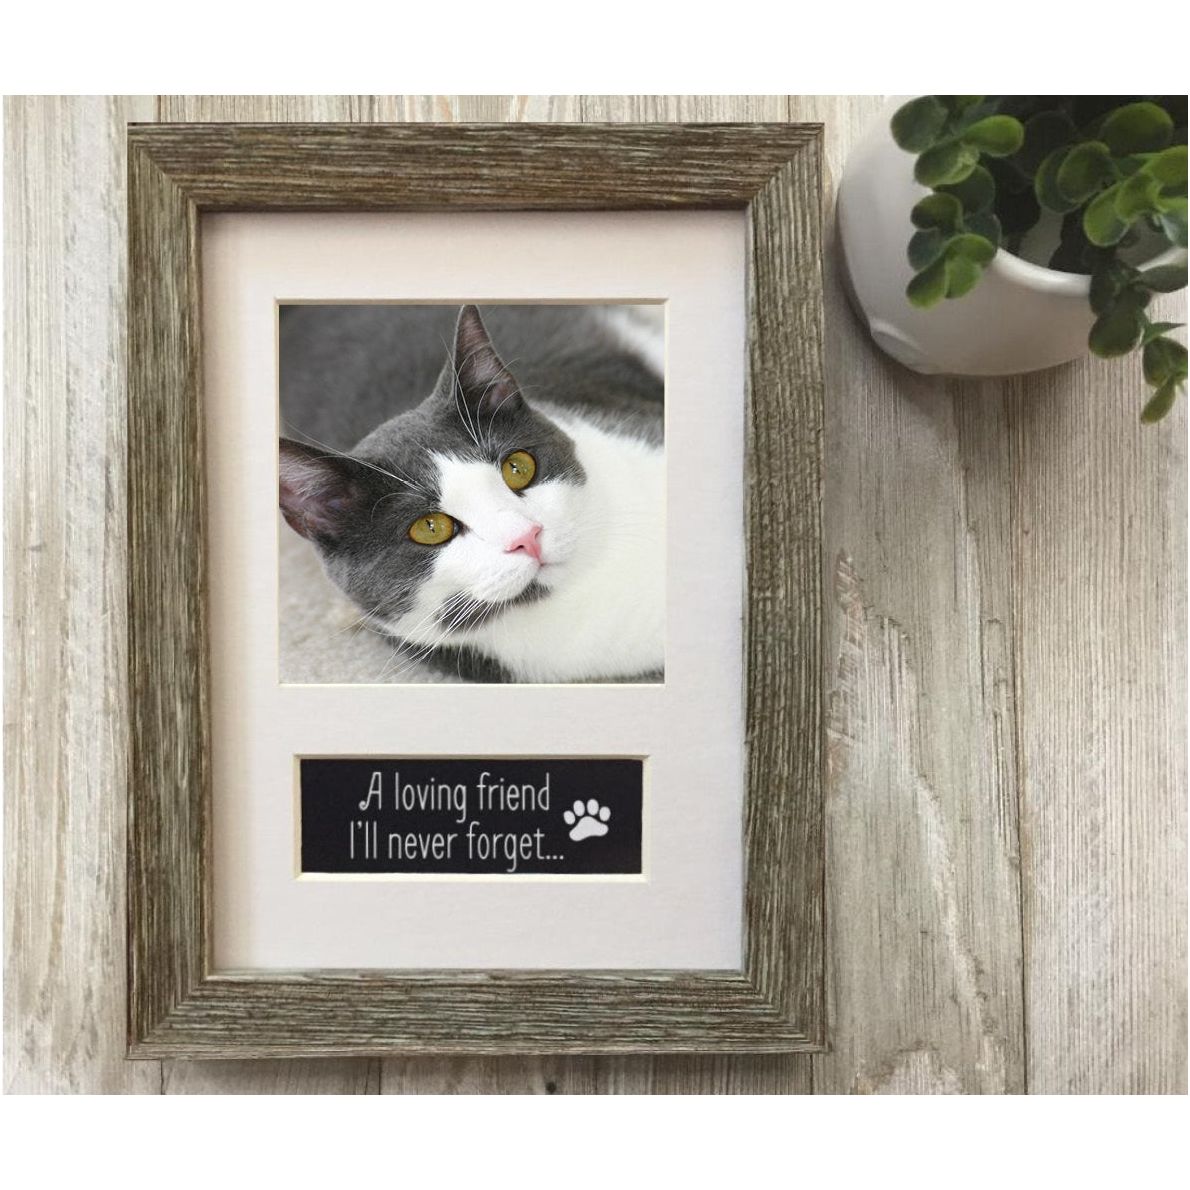 Pet memorial frame with photo of a cat.